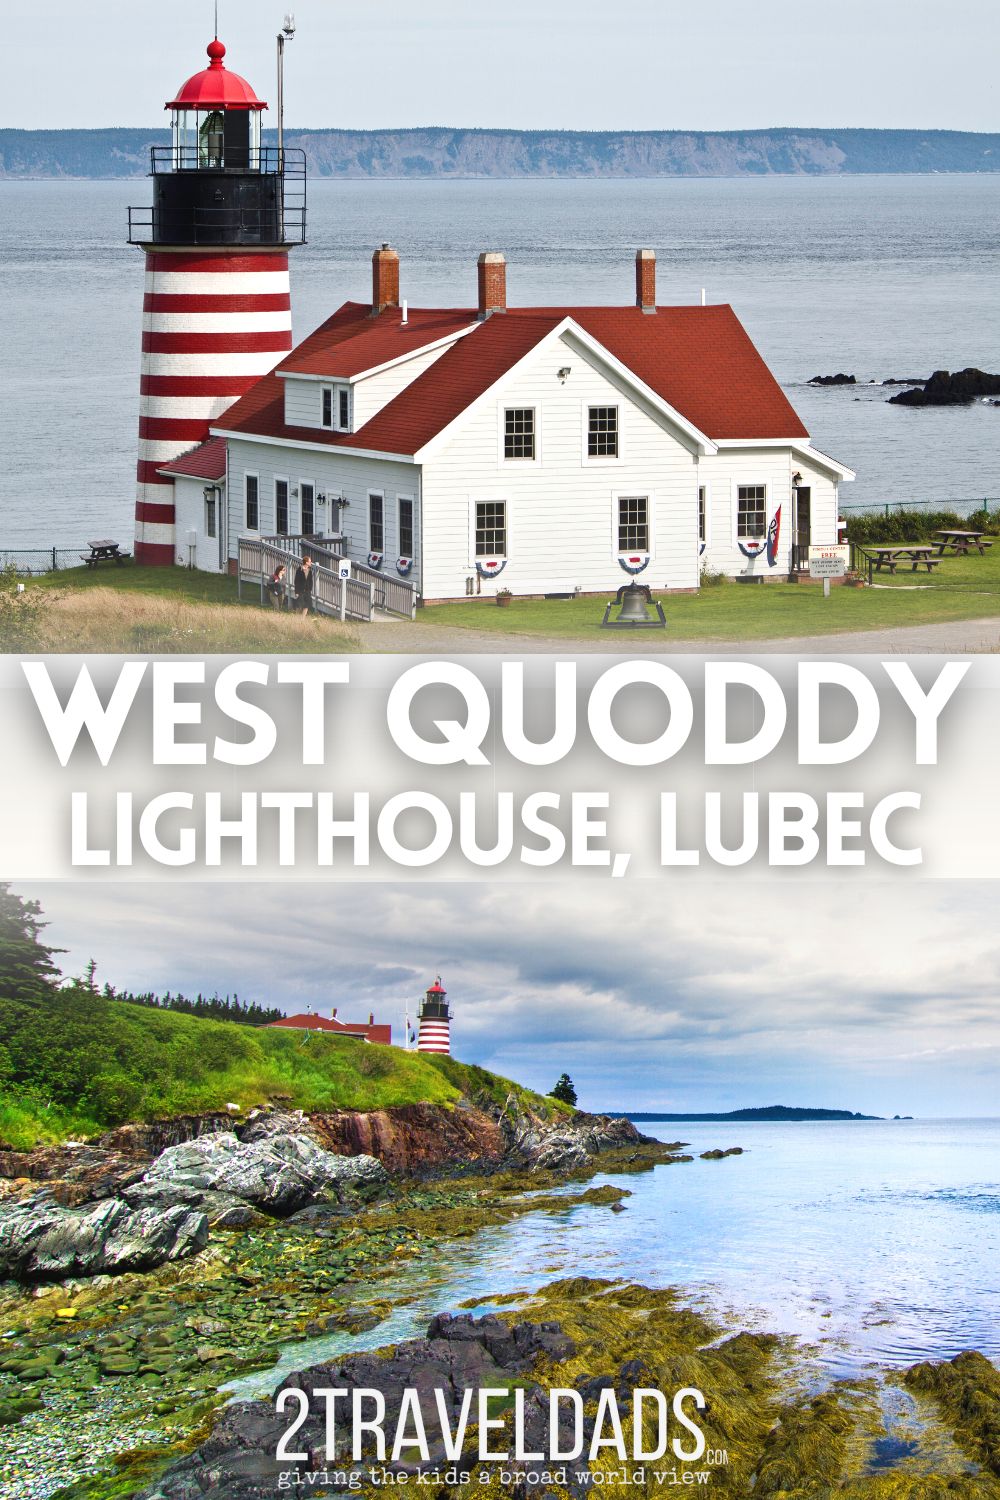 The West Quoddy Lighthouse is the easternmost point in the USA and one of the most unique lighthouses in Maine. See how to visit and what else there is to do in Lubec, Maine.